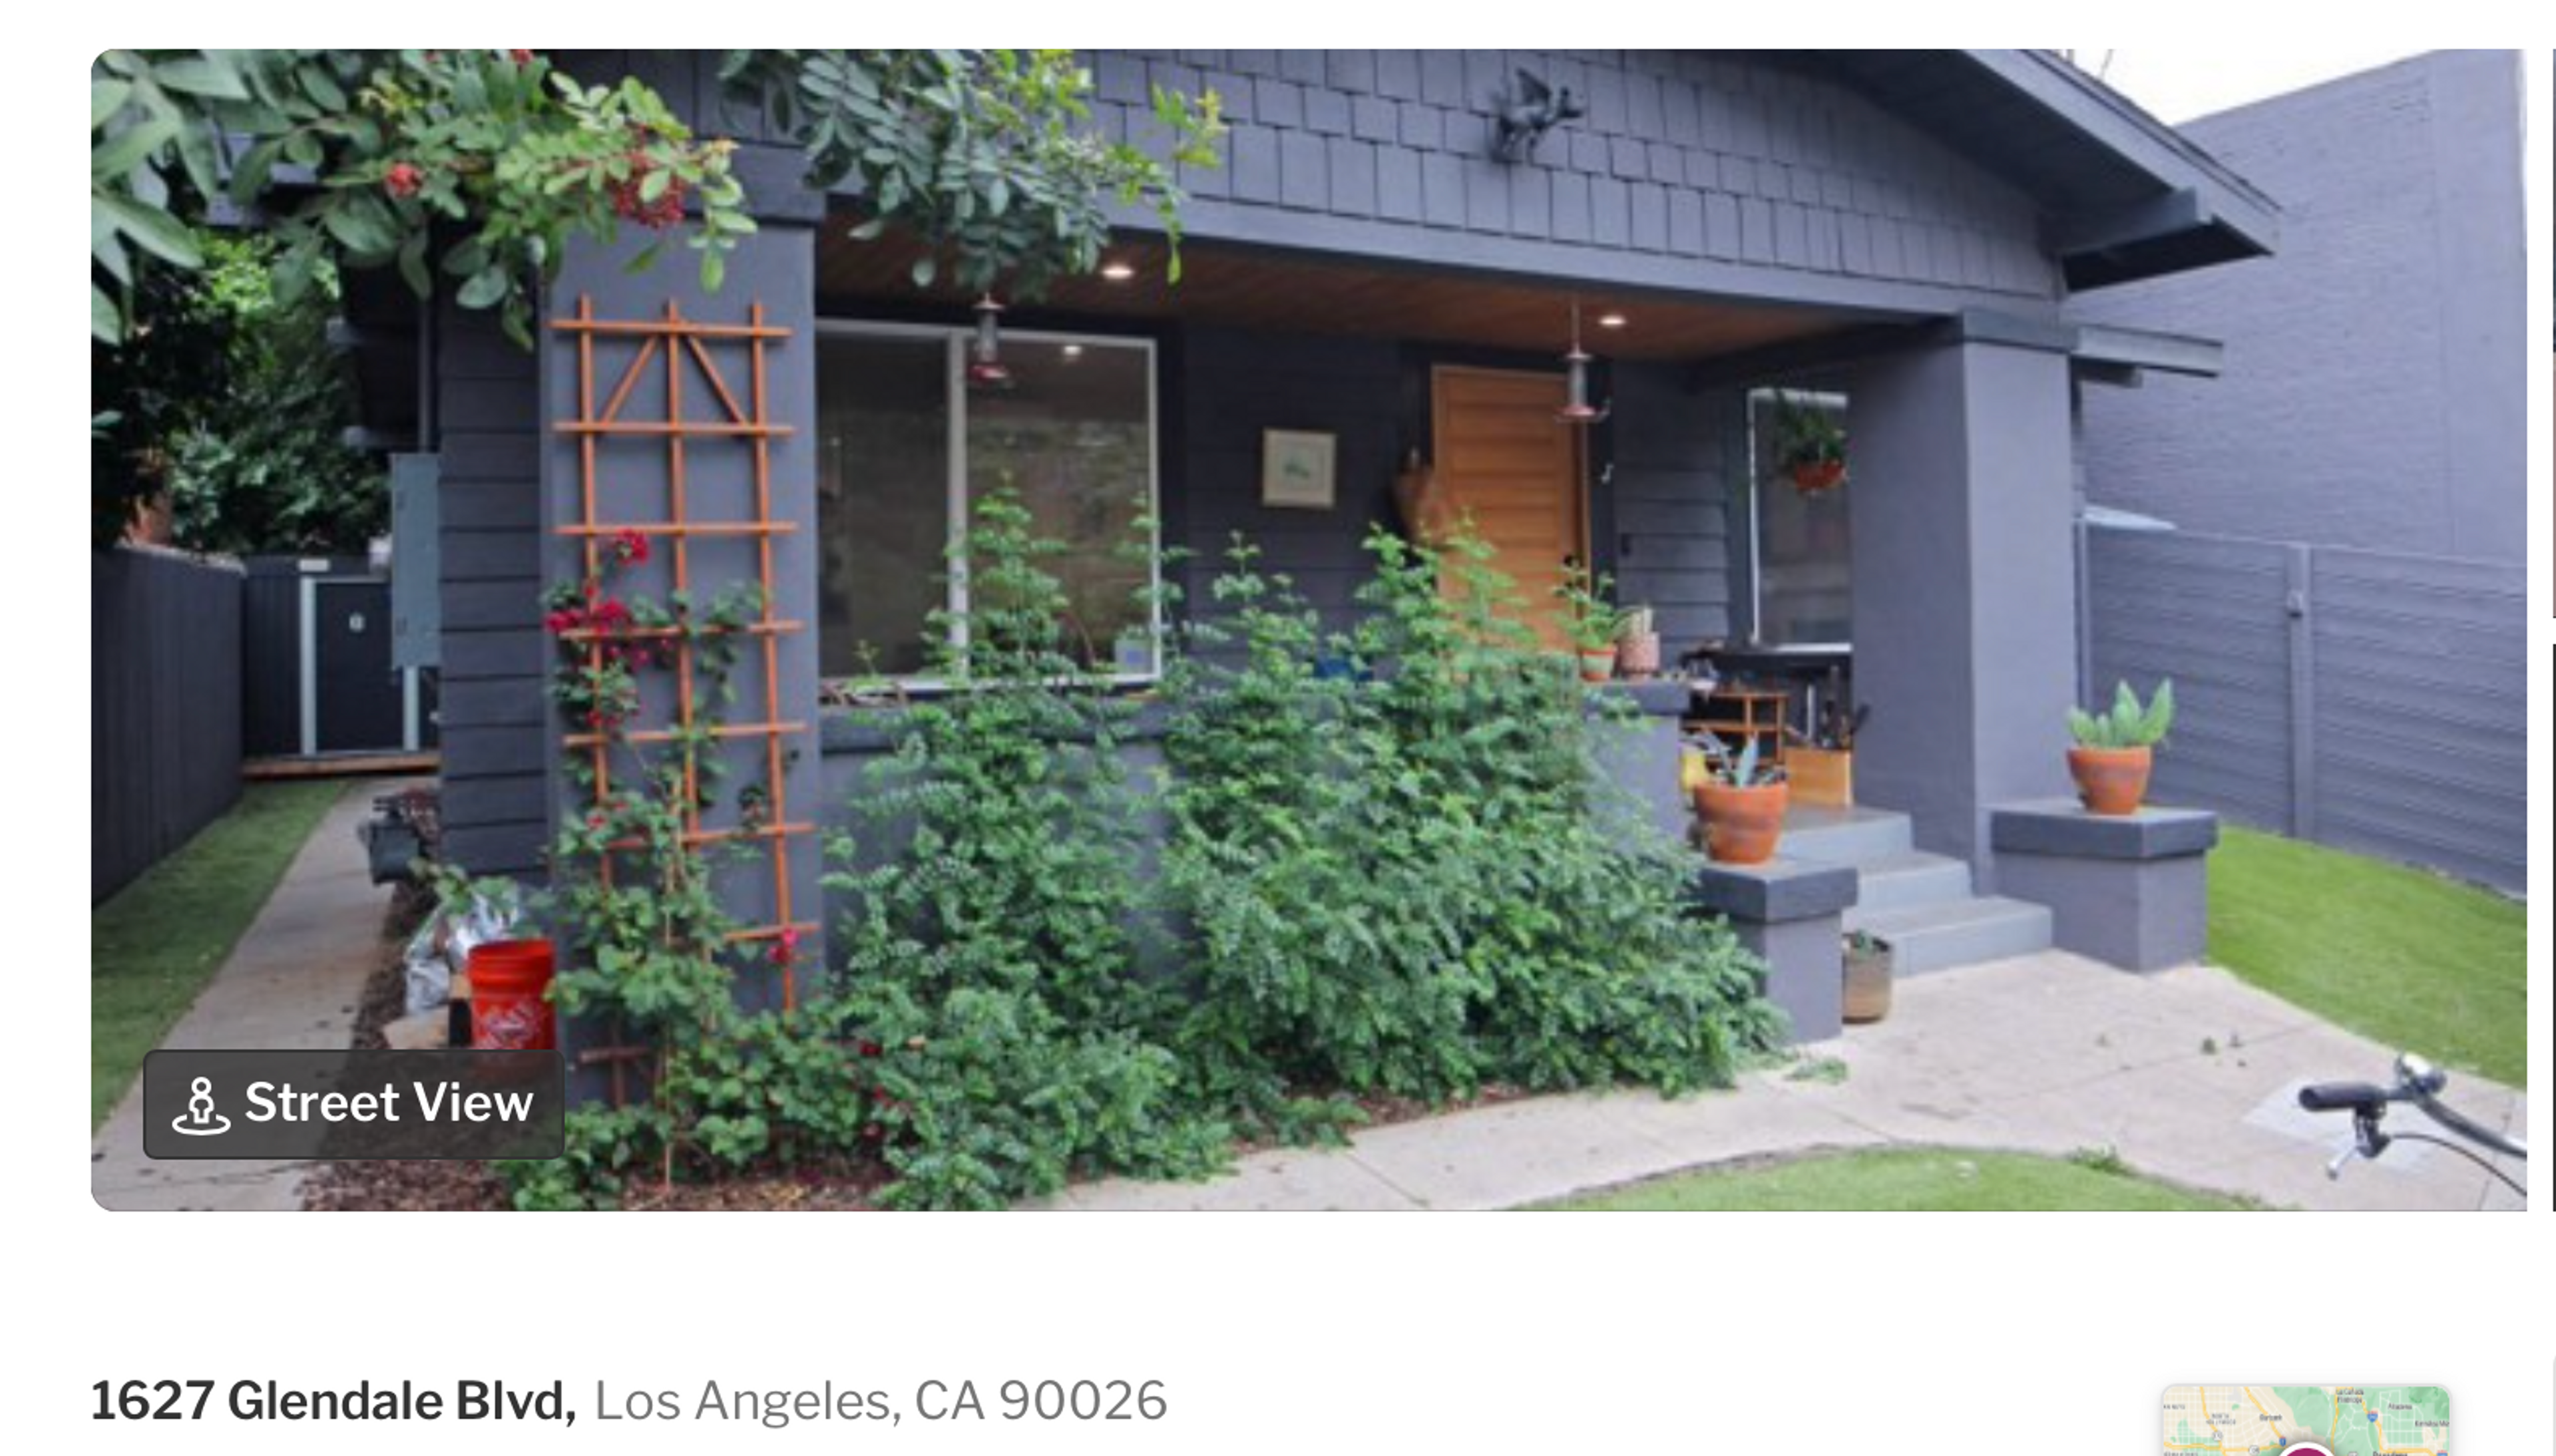 Redfin listing photo of 1627 Glendale Boulevard, a gray Craftsman bungalow that has been extensively repaired.